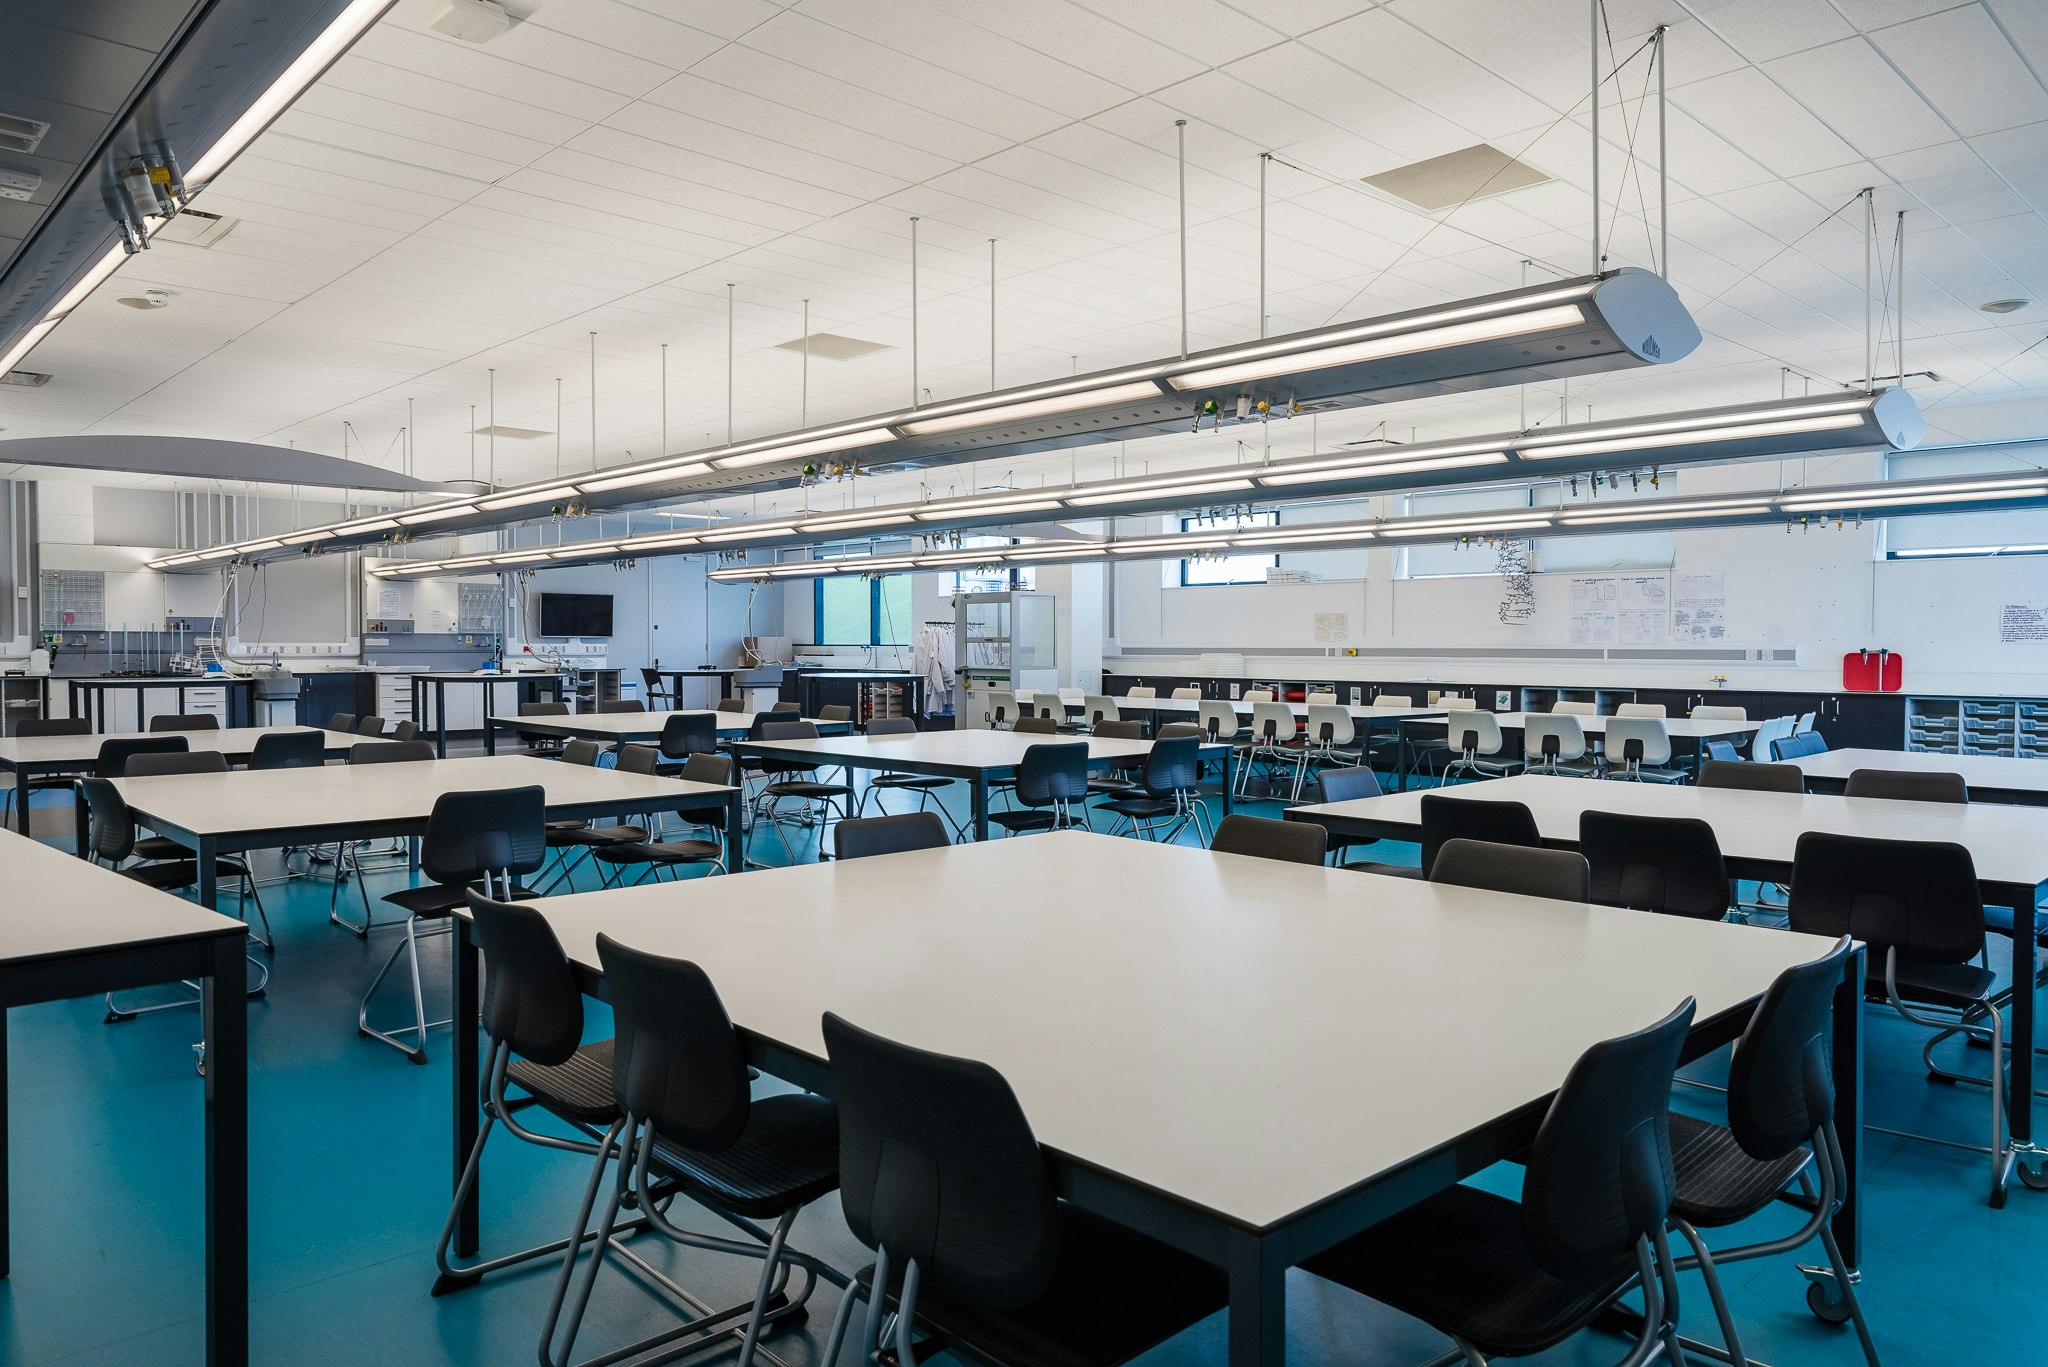 London Academy of Excellence Tottenham - Science classroom / Laboratory image 6